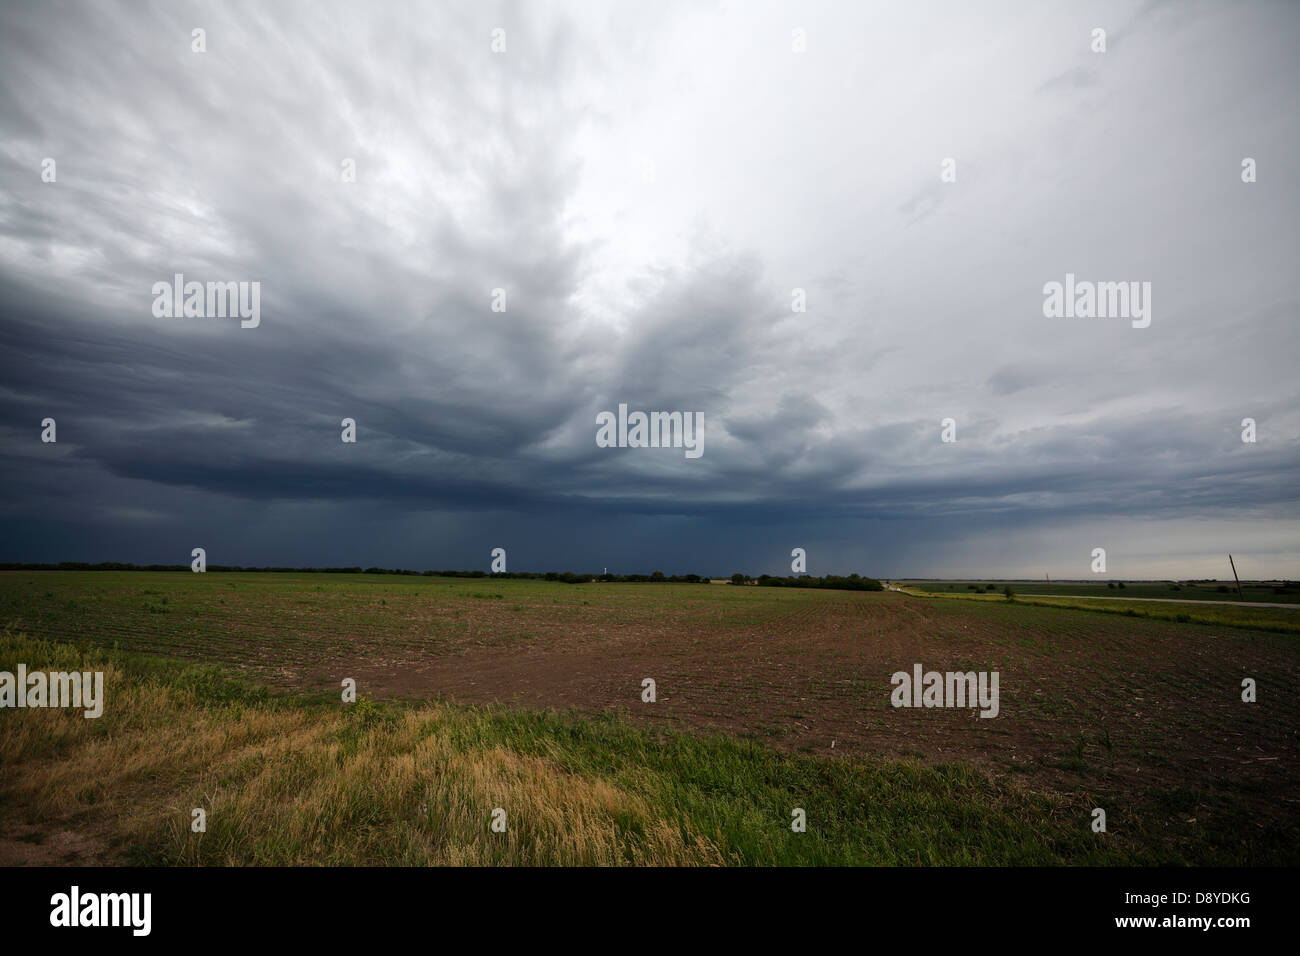 Mesoscale outflow boundary area thunderstorm moving over field. Stock Photo